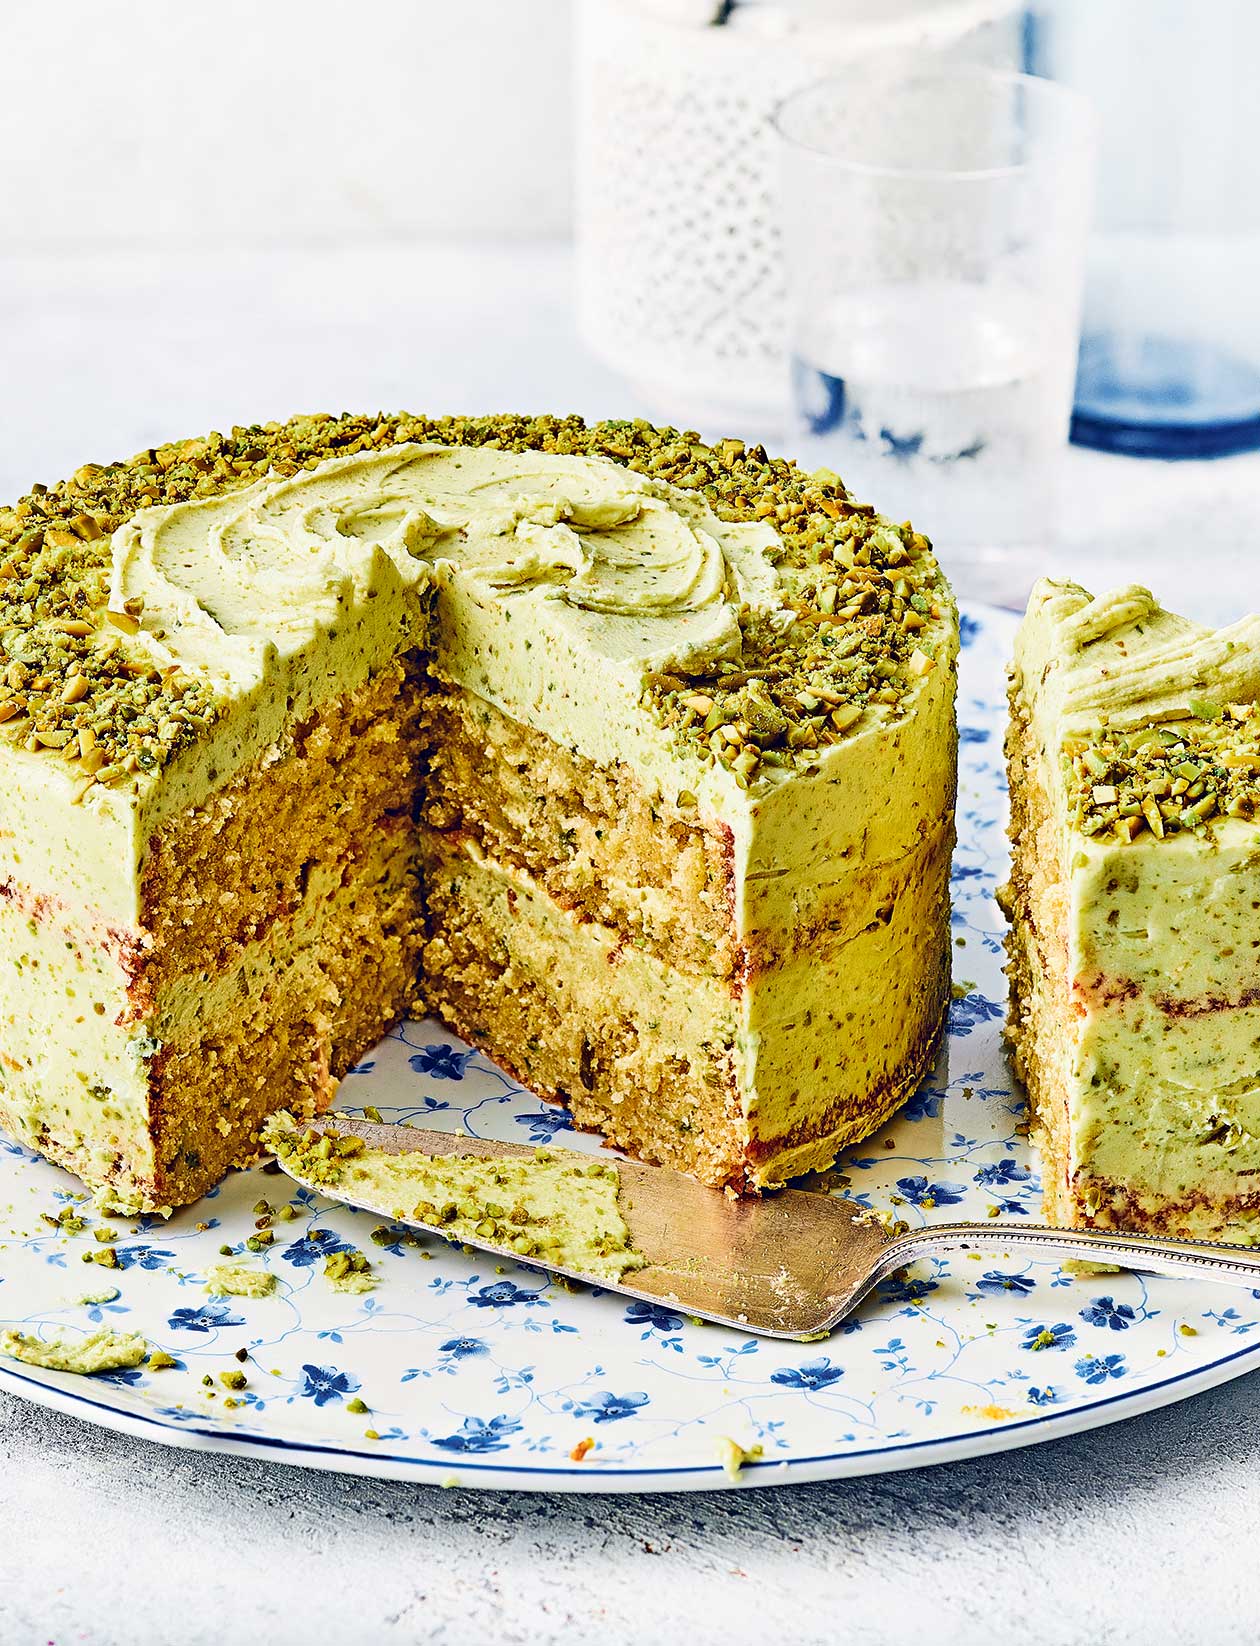 Pistachio Cake with White Chocolate Frosting - Baran Bakery